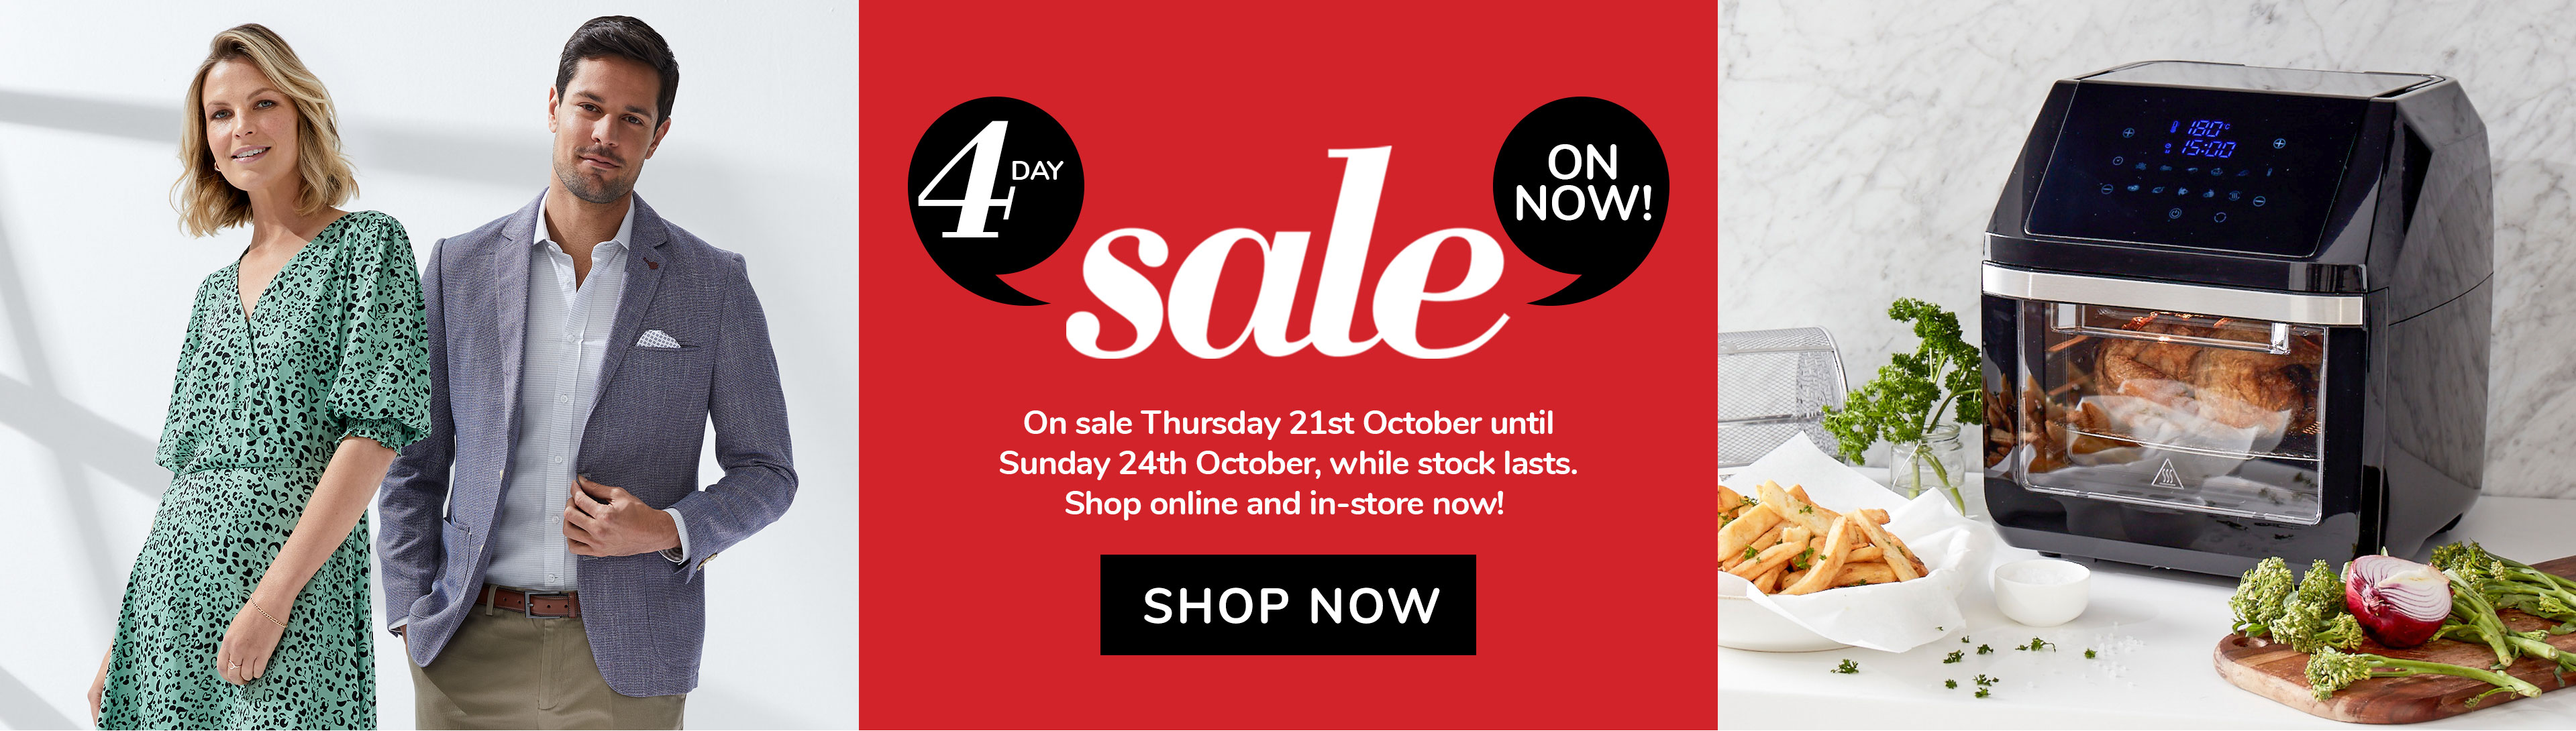 4 Day sale up to 50% OFF on homeware, electrical, clothing & more